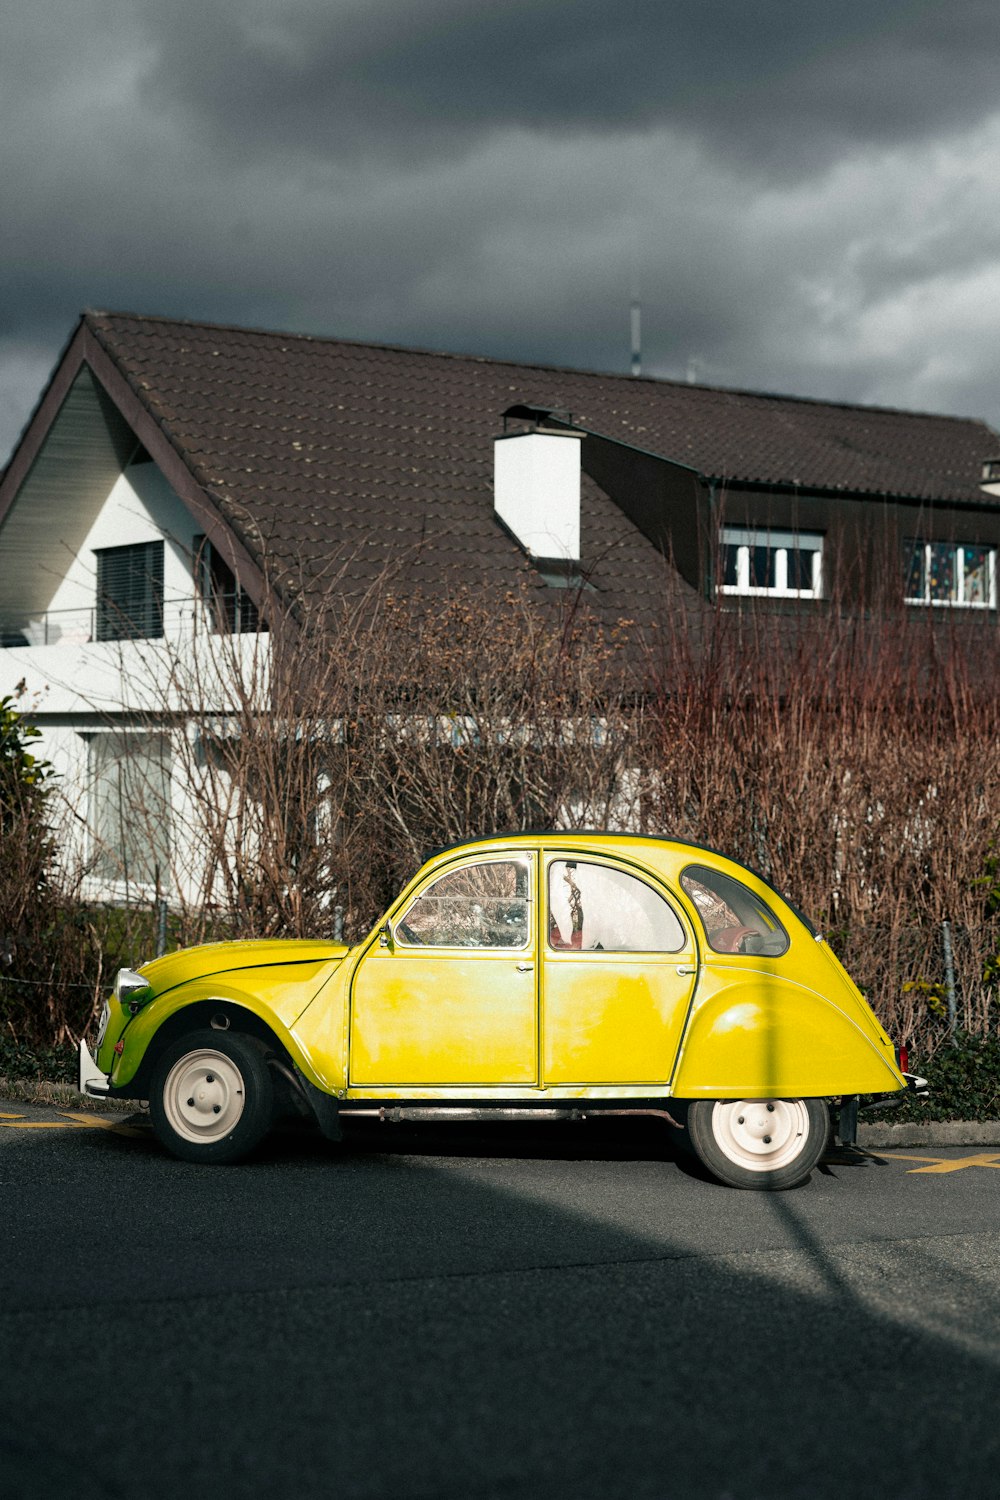 a small yellow car parked in front of a house